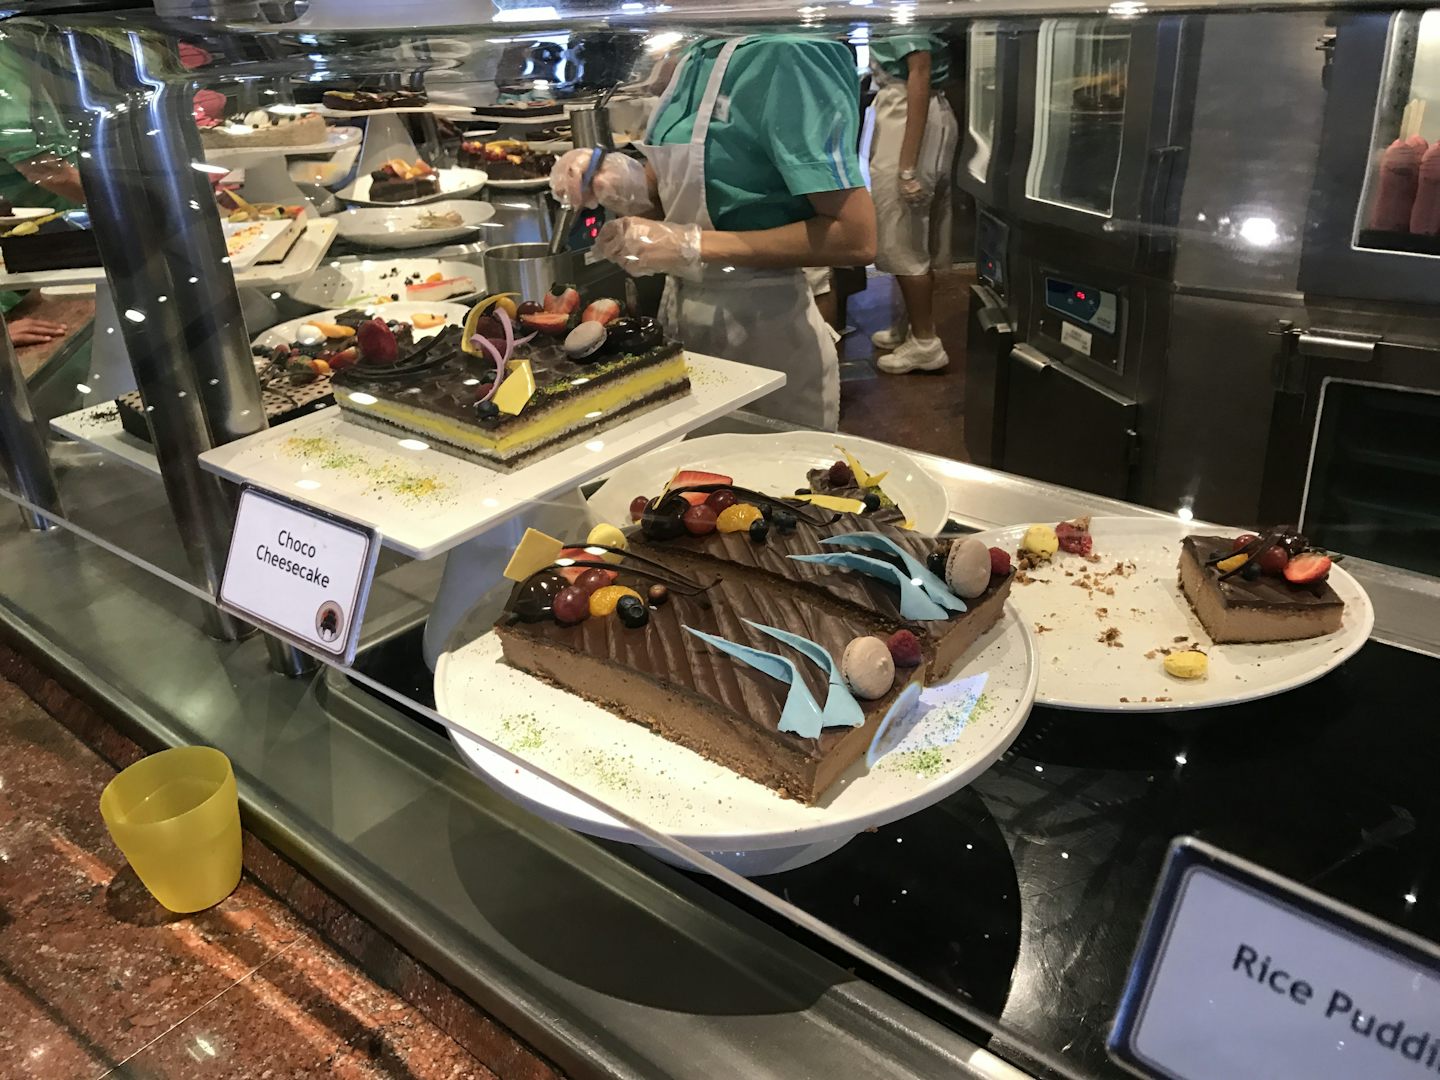 Desserts at the buffet